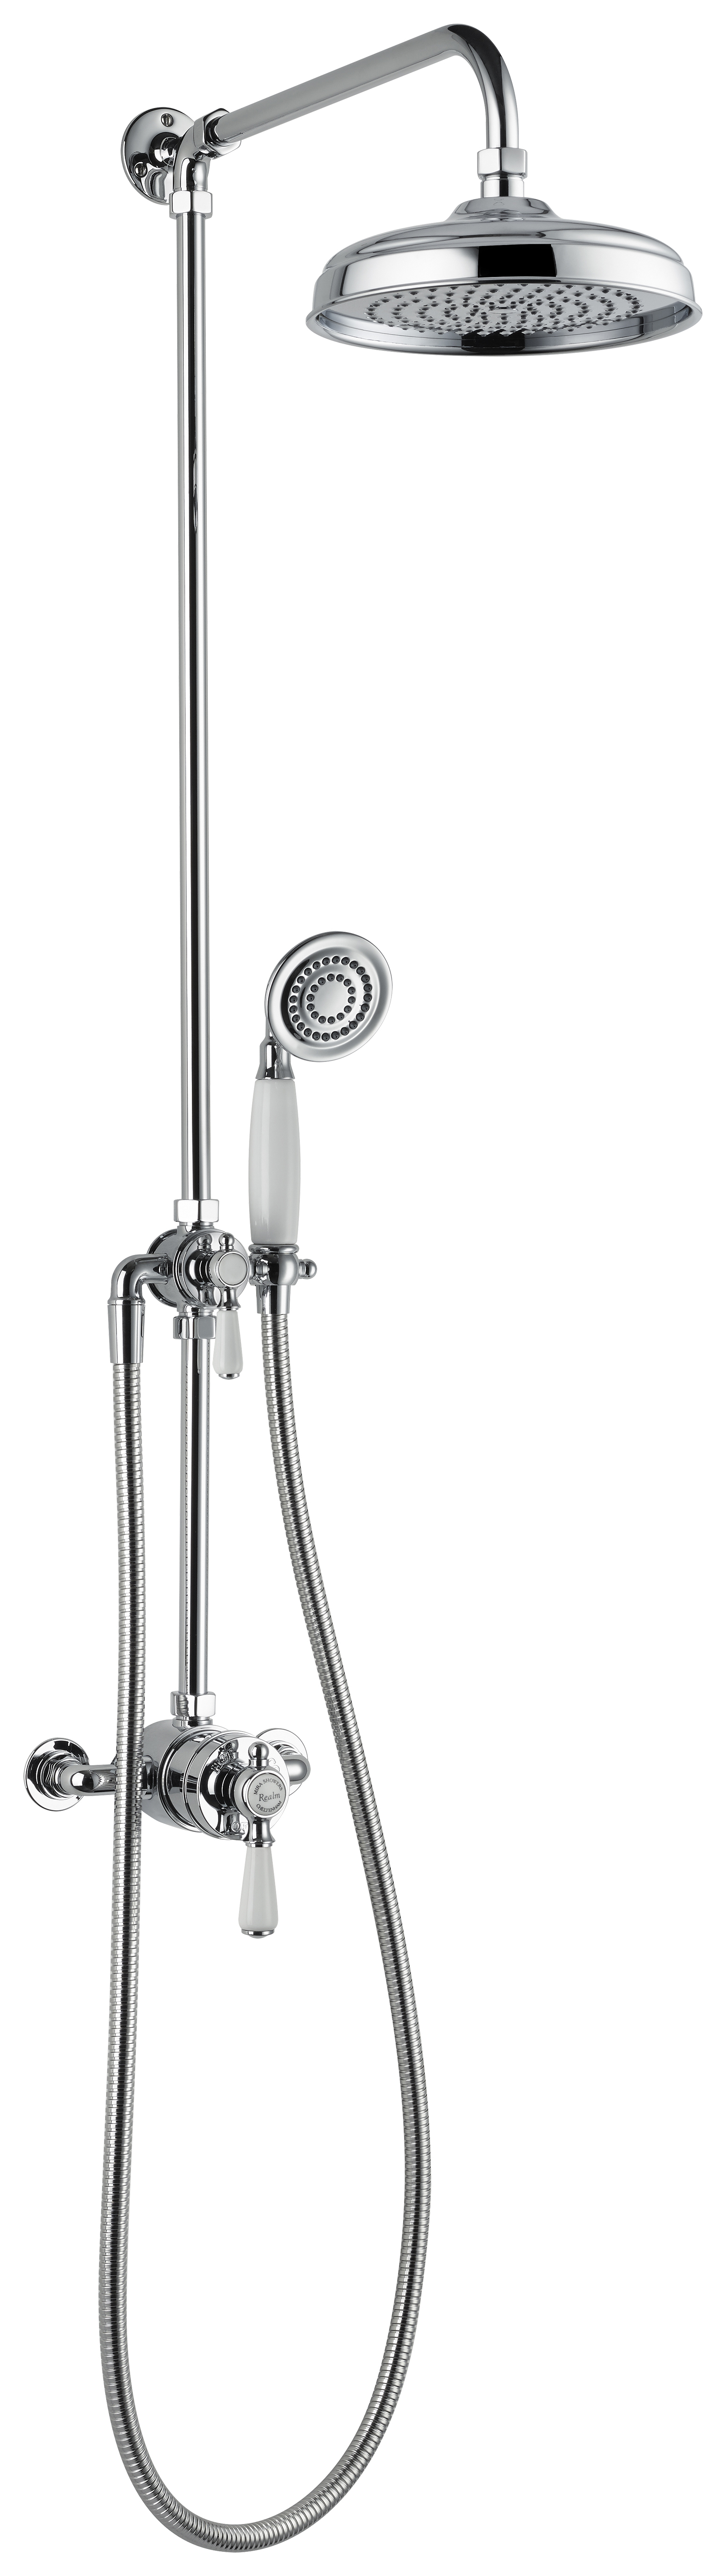 Mira Realm Dual Outlet ERD Thermostatic Rear Fed Mixer Shower - Chrome